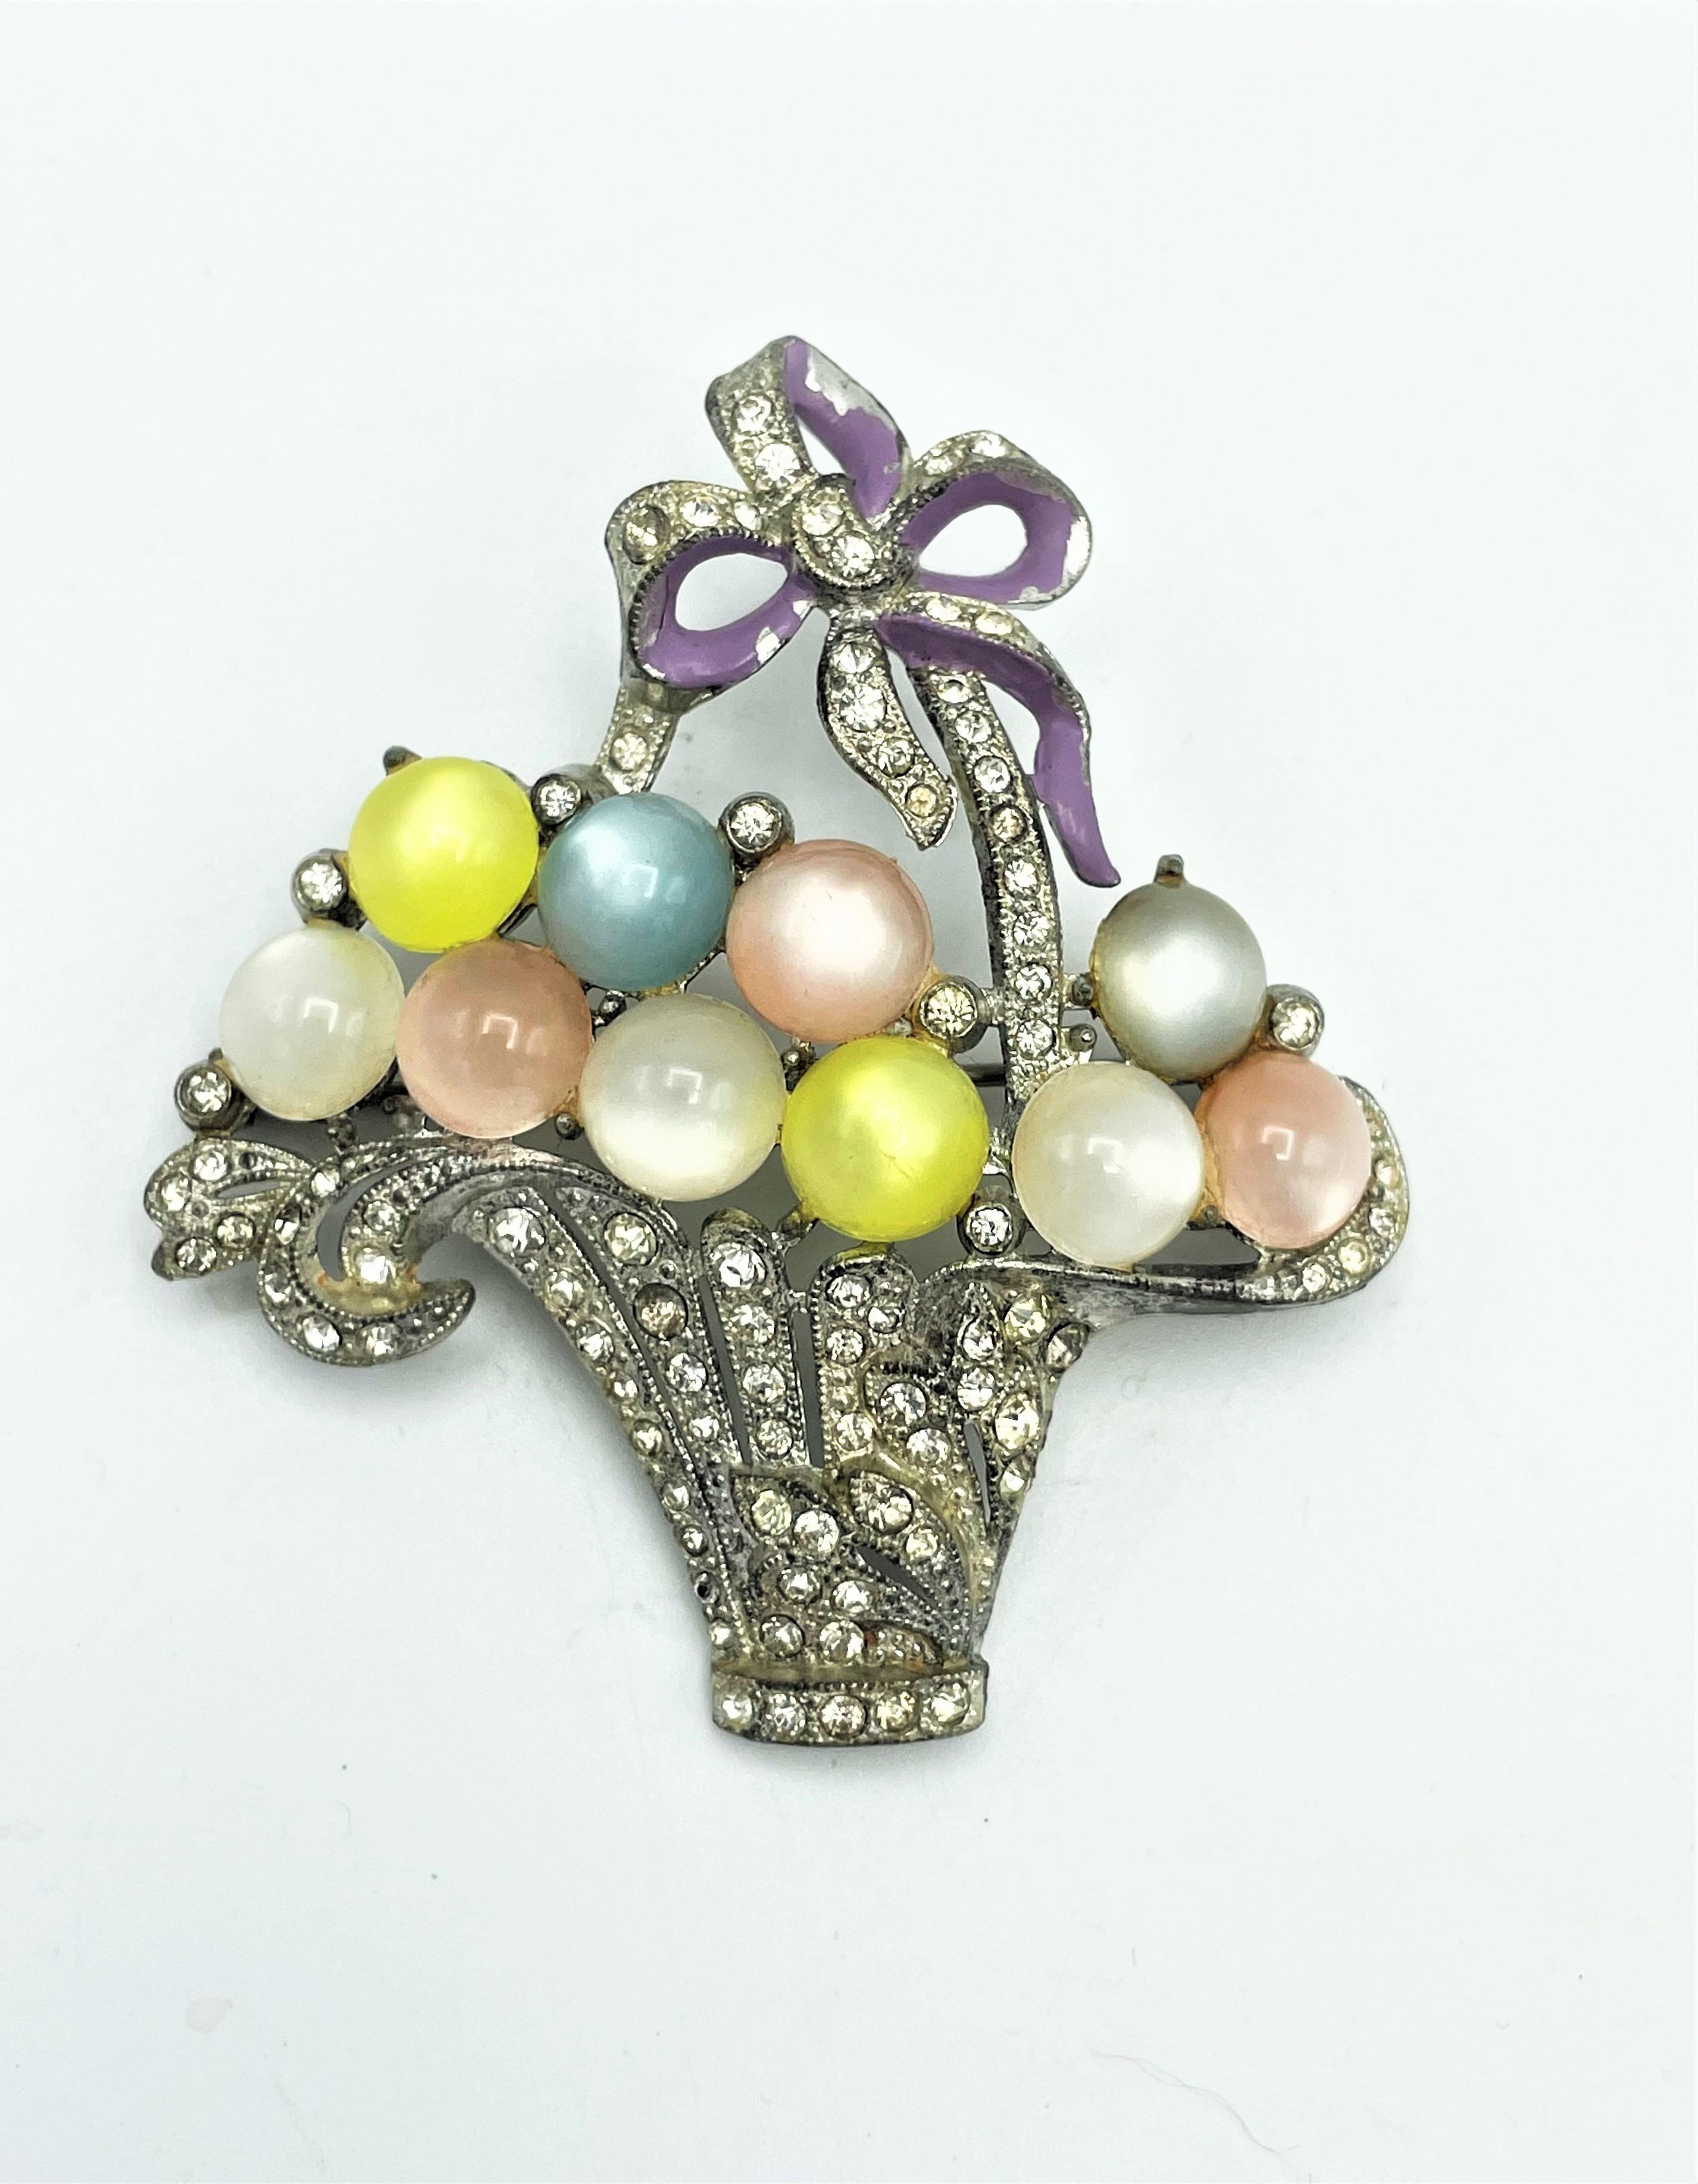 Vintage flower basket brooch cast in rhodium plated metal and set with many small rhinestones and simulated moonstones . Bow bottom enameled. Book piece!
Measurement: High 6 cm, Wide 7 cm, 10 pastel glass stones 1 cm in diameter. USA late 1930s.